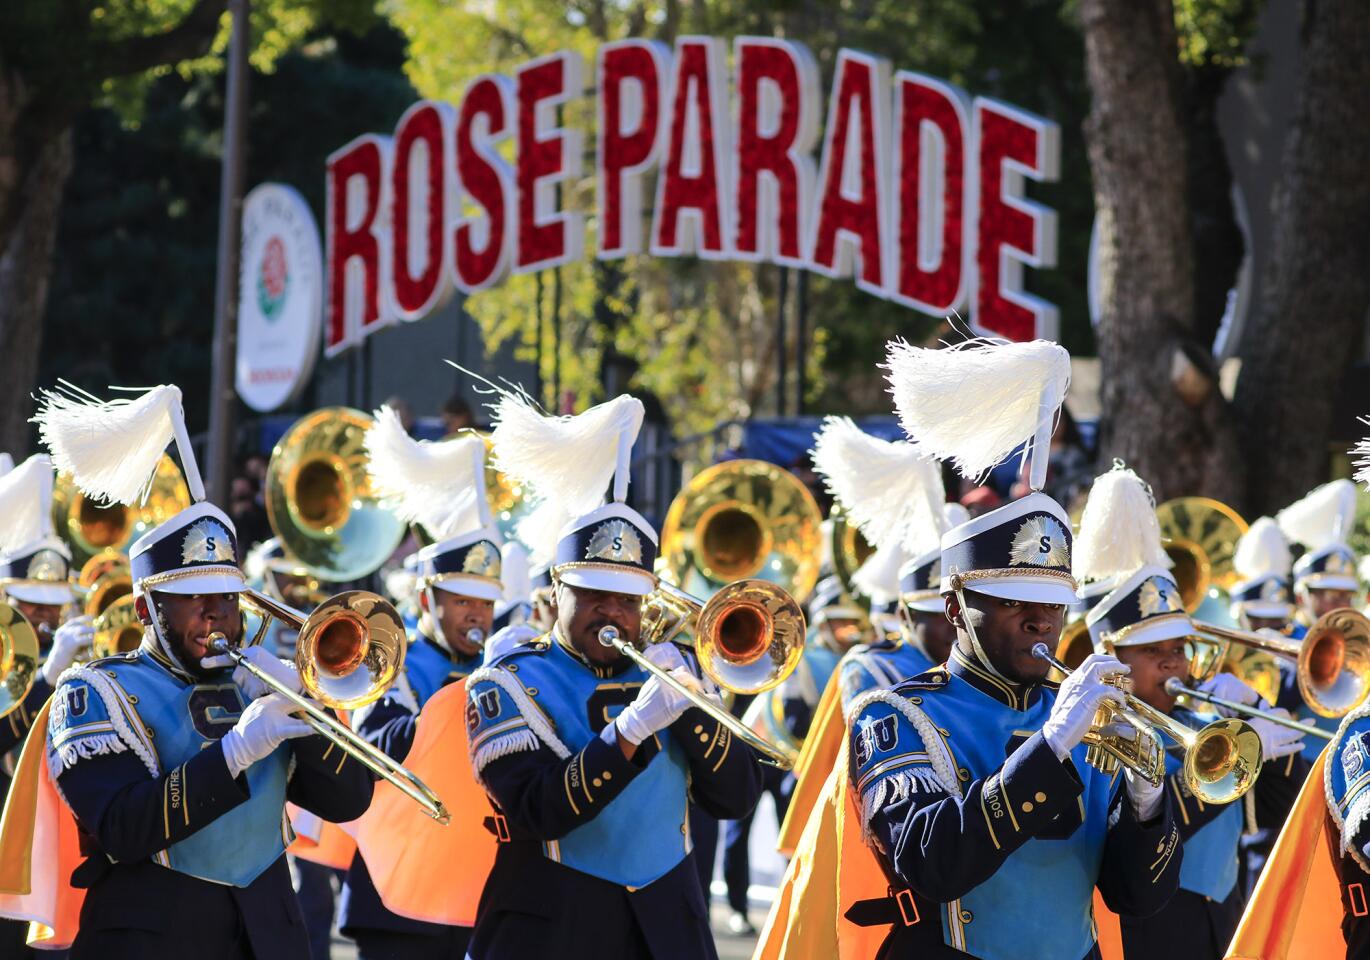 PASADENA CA., JANUARY 1, 2020: The Southern University and A&M College marching band heads down Orange Grove Blvd during The 131st Rose Parade (Mark Boster For the LA Times).